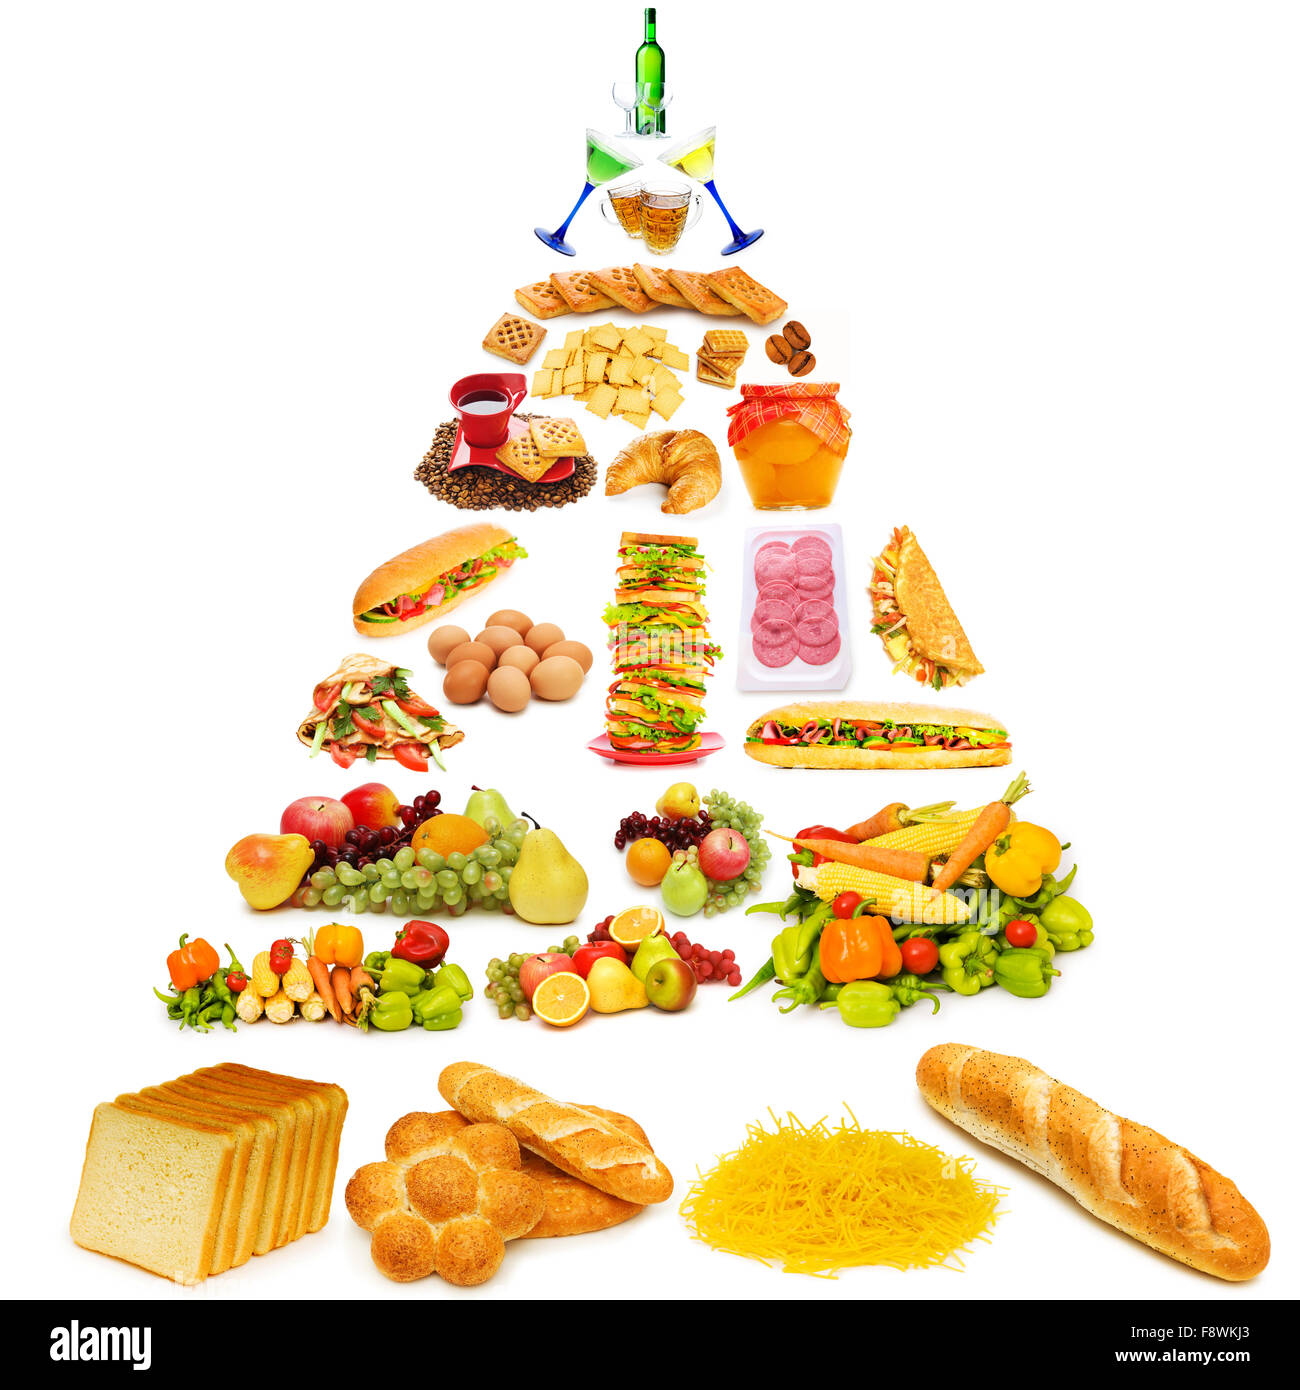 Food pyramid with lots of items Stock Photo - Alamy